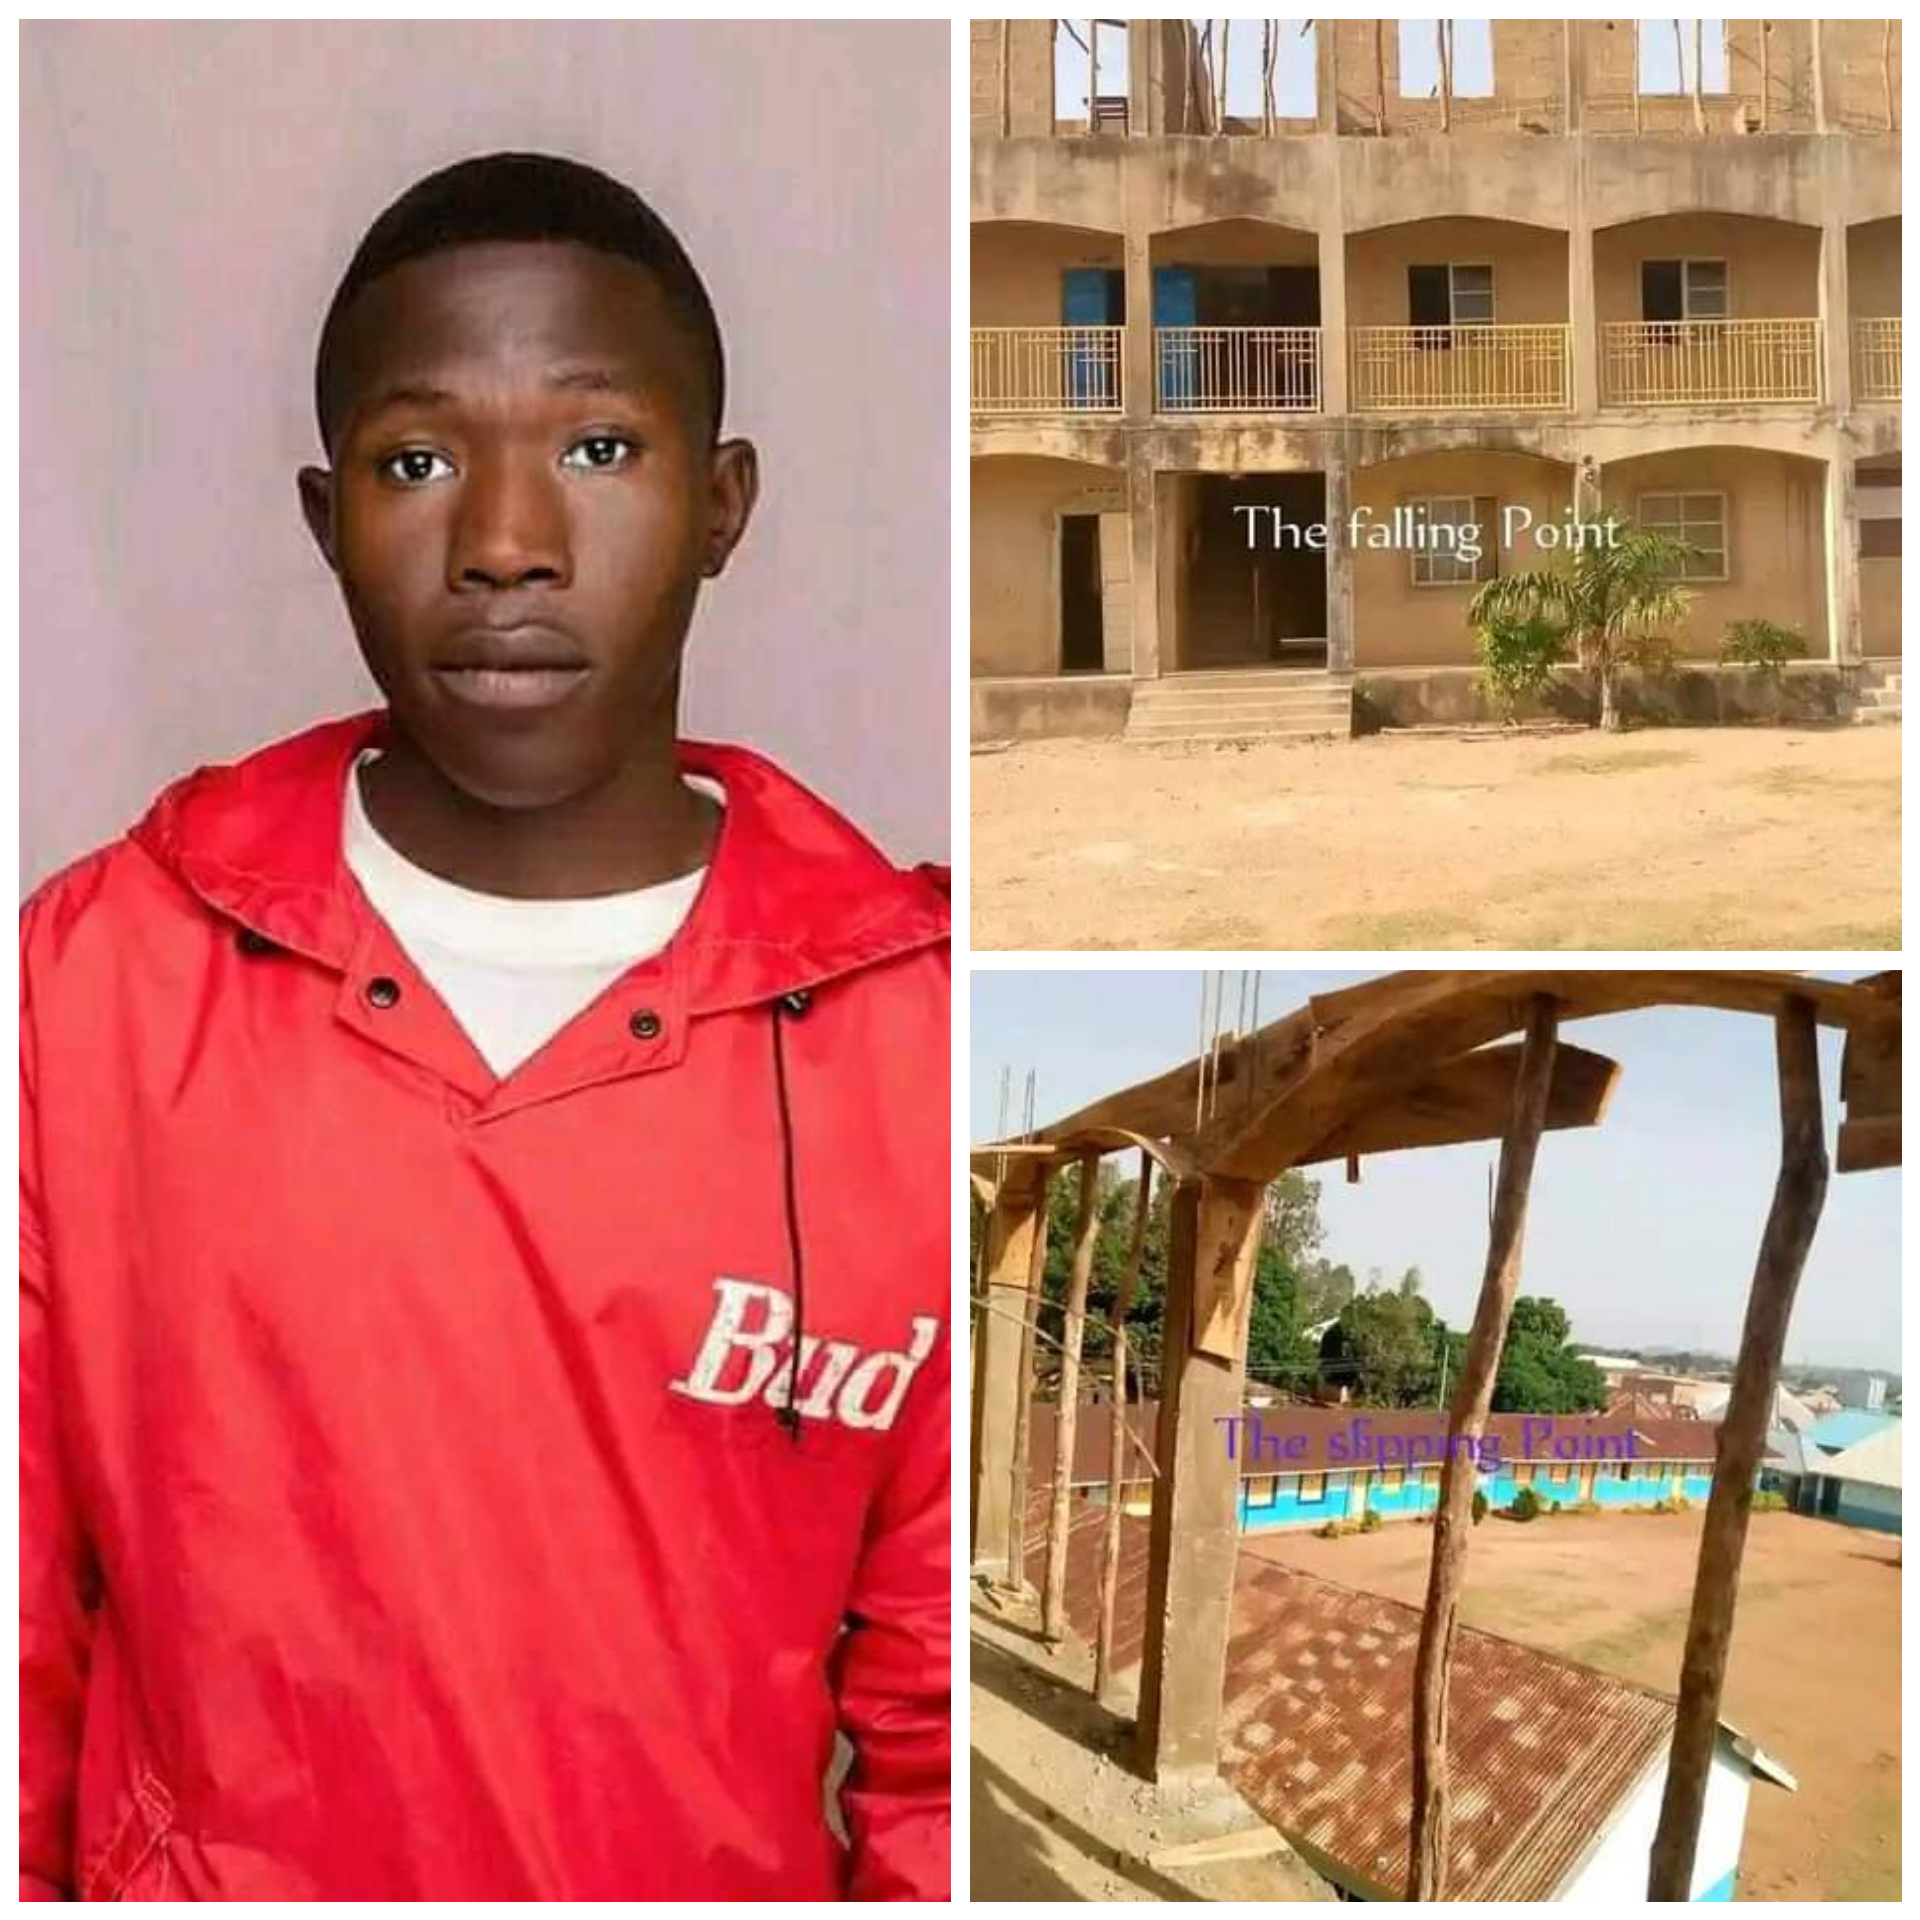 300-LEVEL PLATEAU VARSITY STUDENT DIES AFTER FALLING FROM BUILDING WHILE DOING CARPENTRY WORK